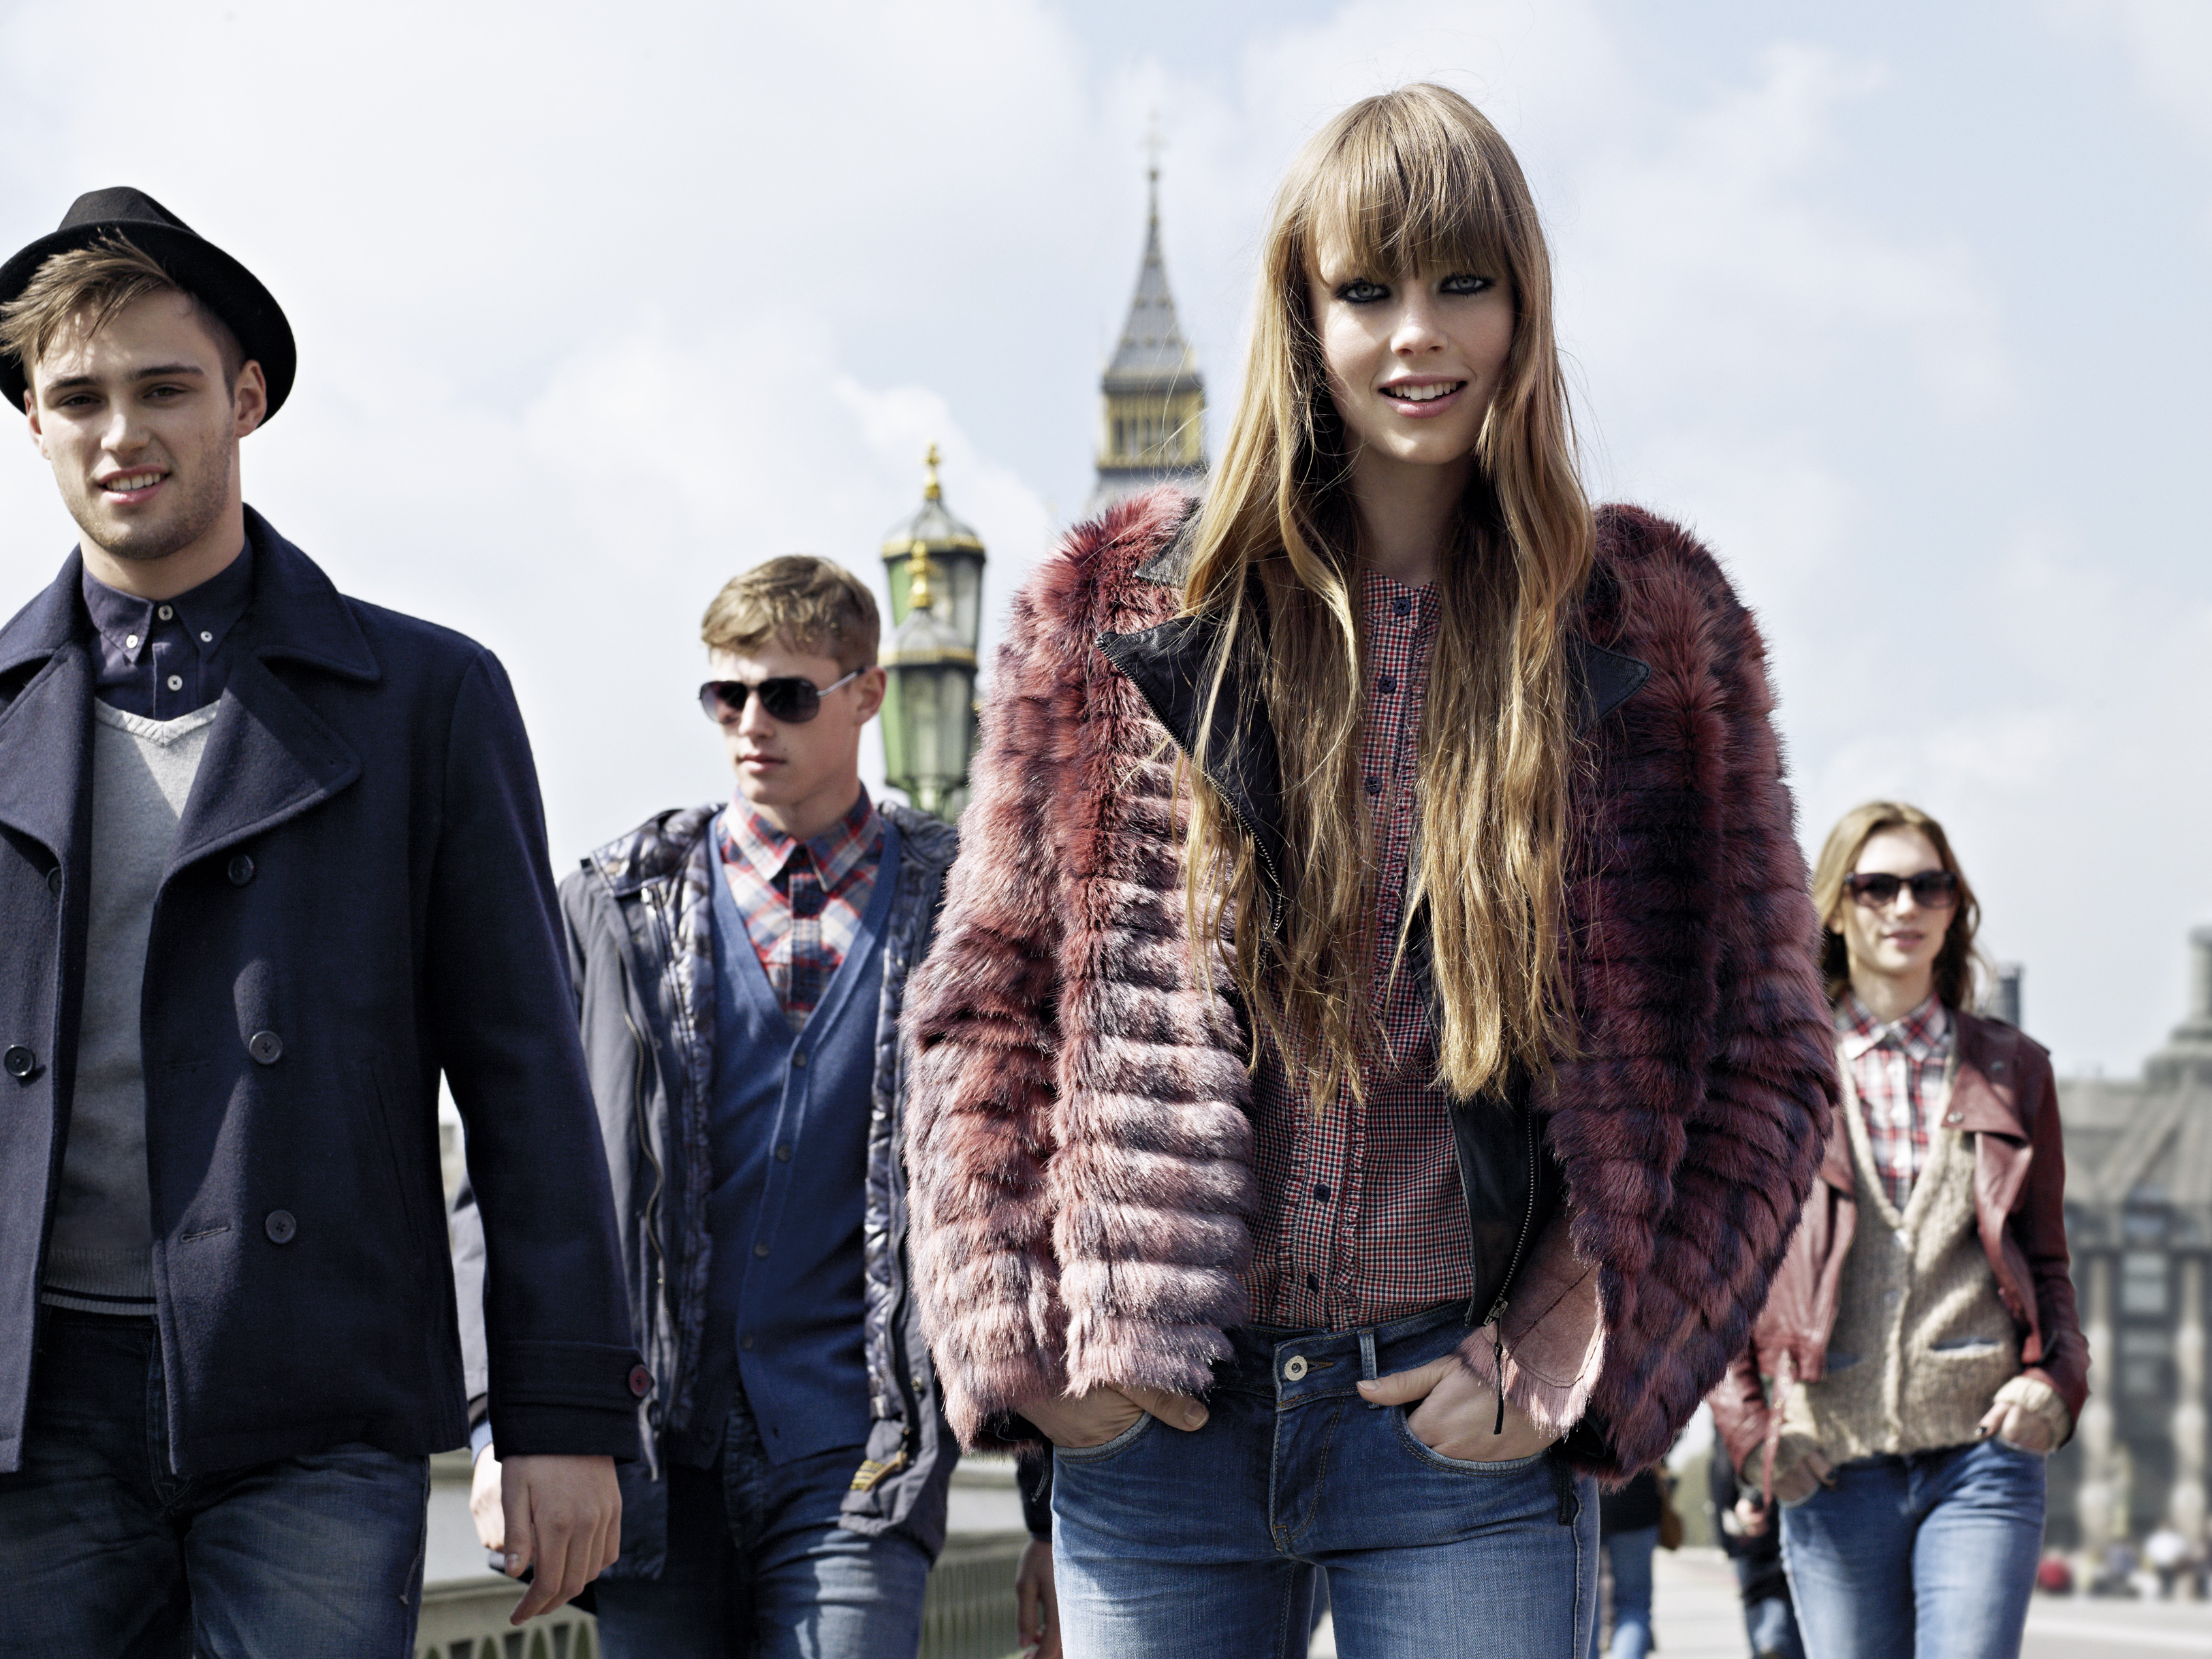 Pepe Jeans AW 2012 Ad Campaign 16